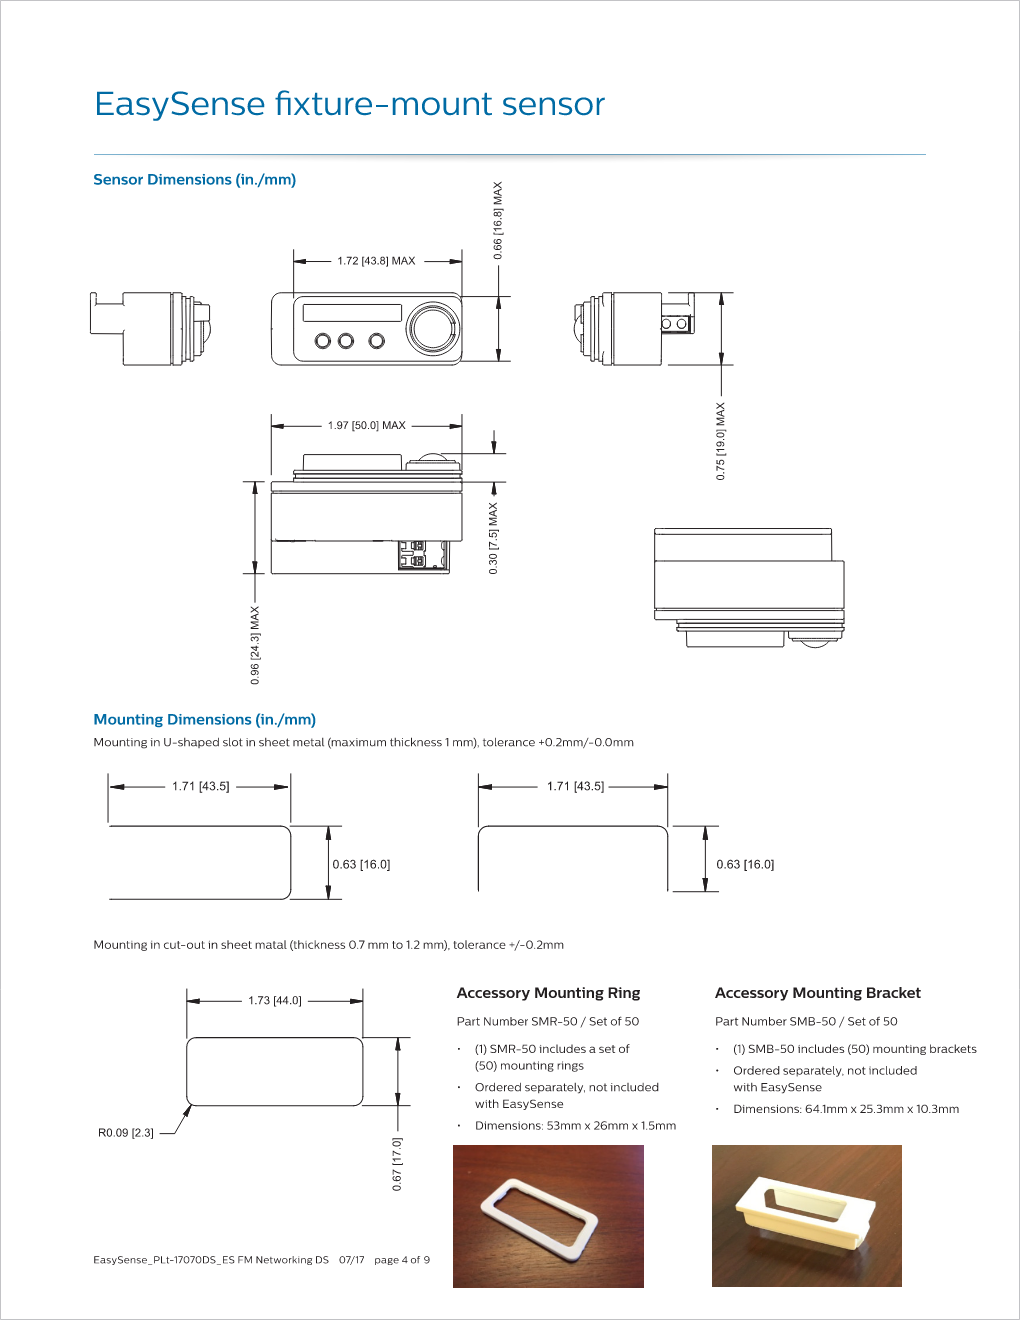 Philips_EasySense_SNS300_Fixture-Mount_for_Networking_Datasheet__PLt-17070DS__Page_004.png